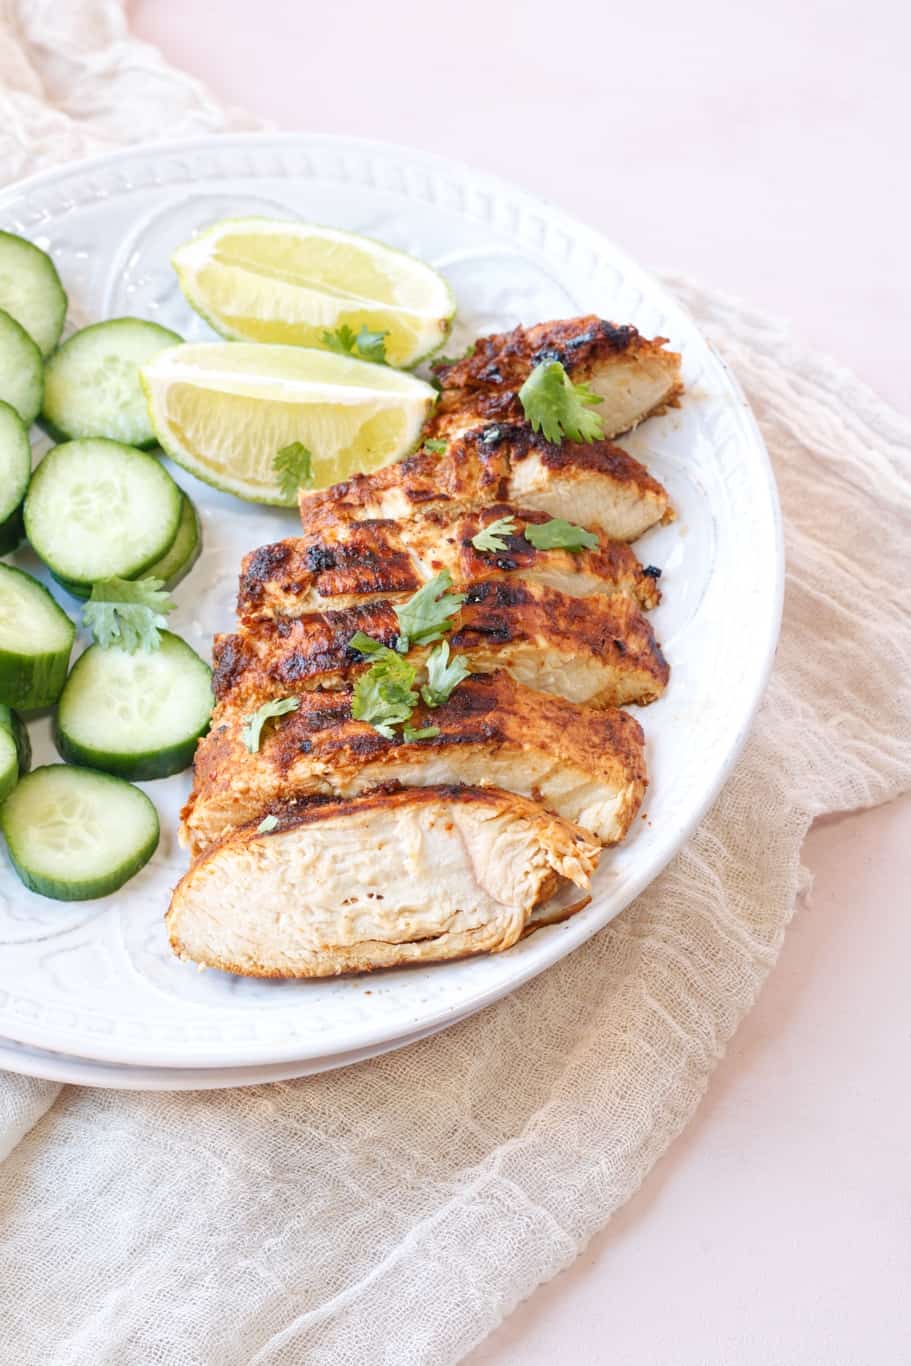 delicious pollo asado chicken breast cut into pieces and served with cucumber and lemon wedges